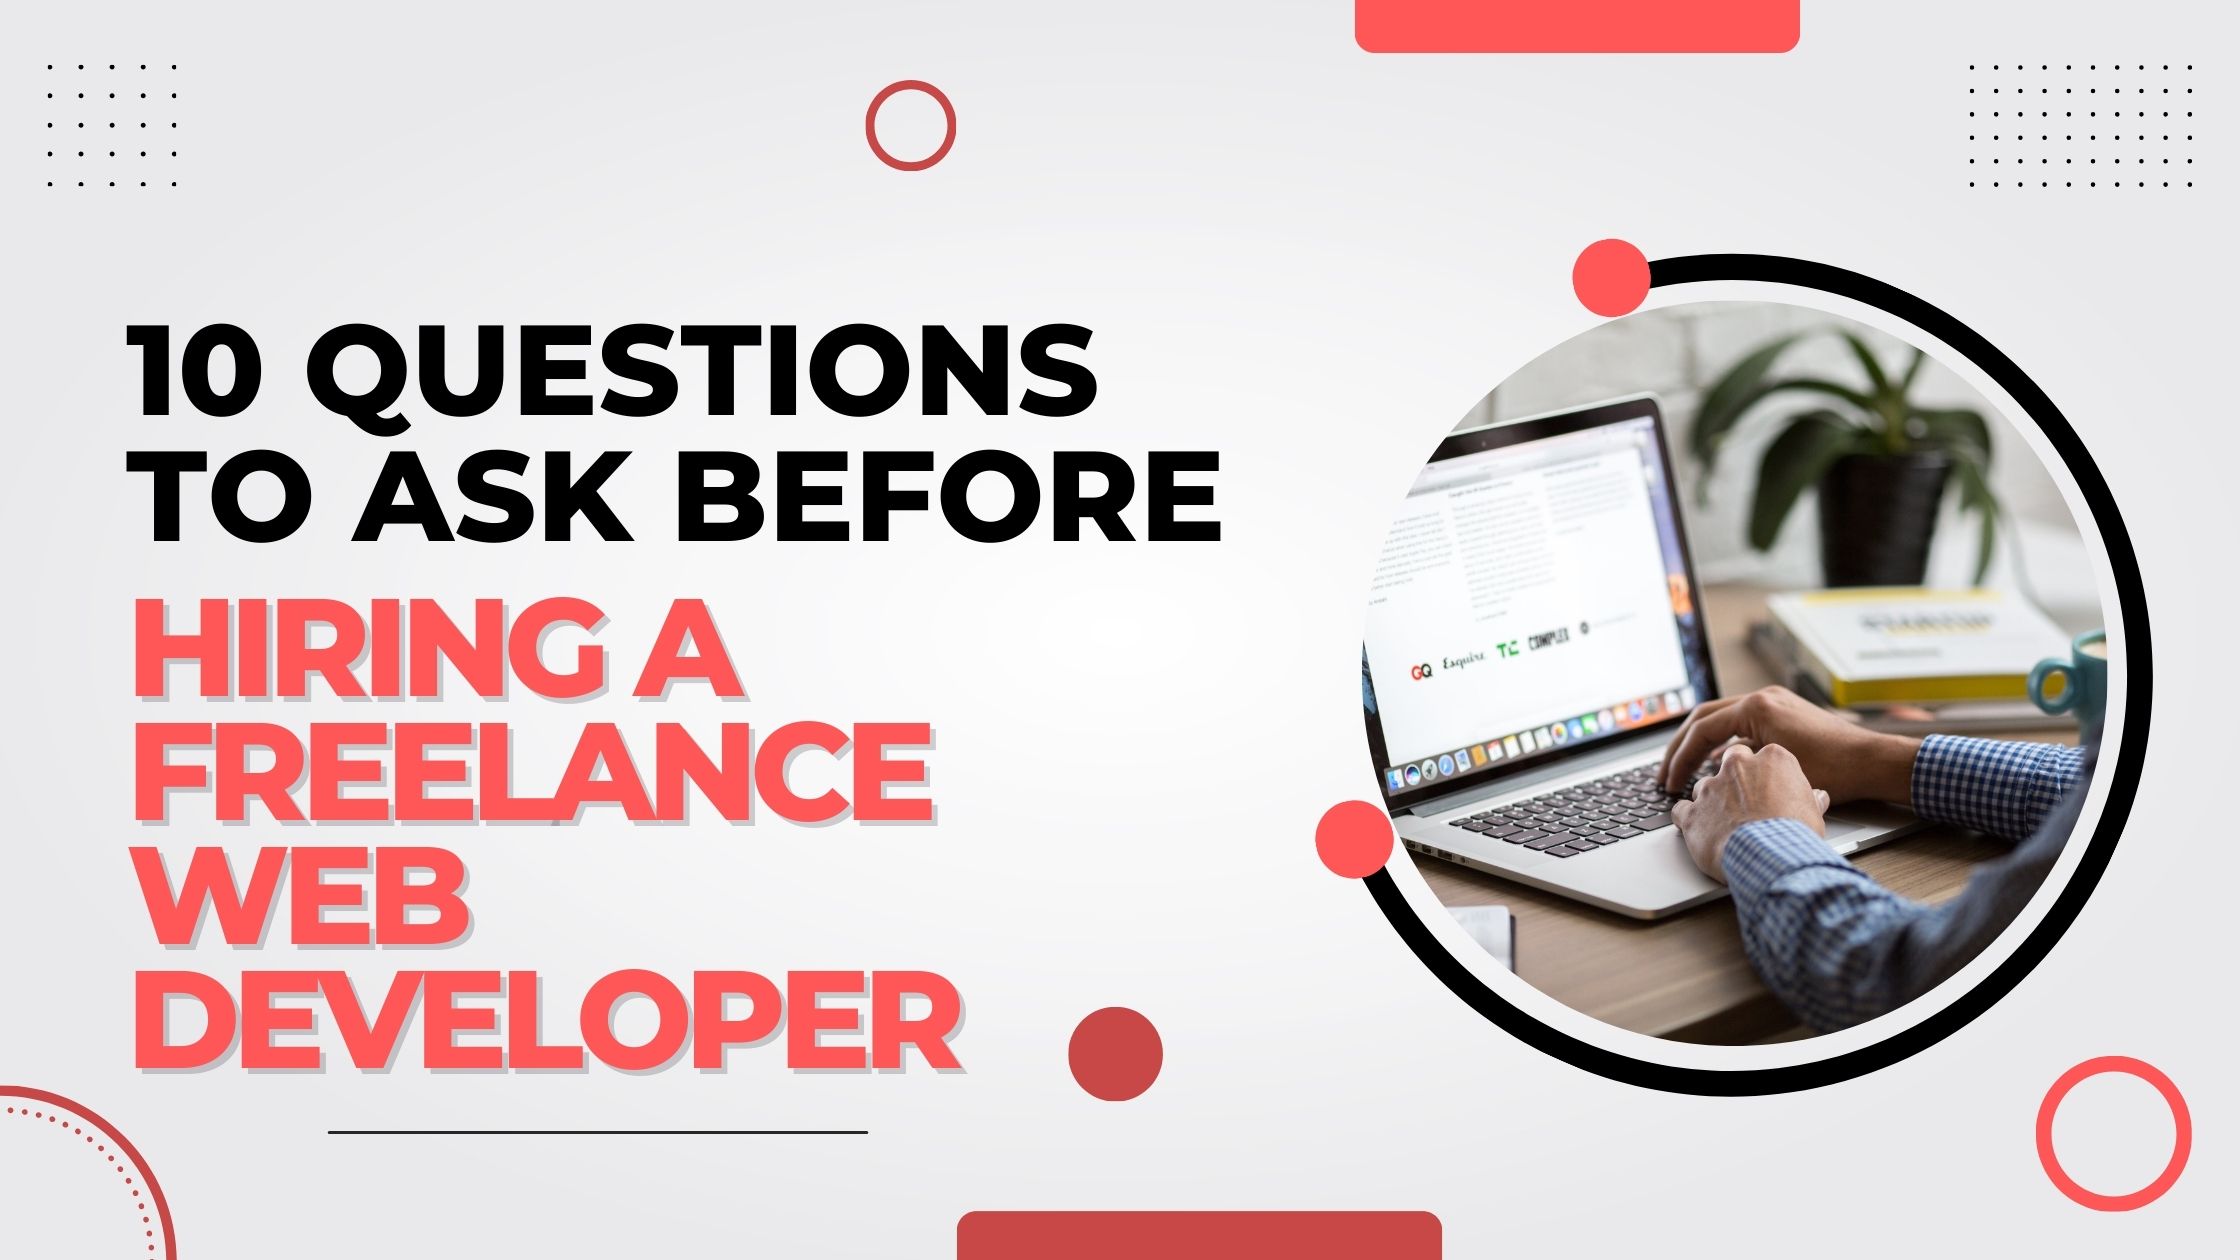 10 Questions to Ask Before Hiring a Freelance Web Developer